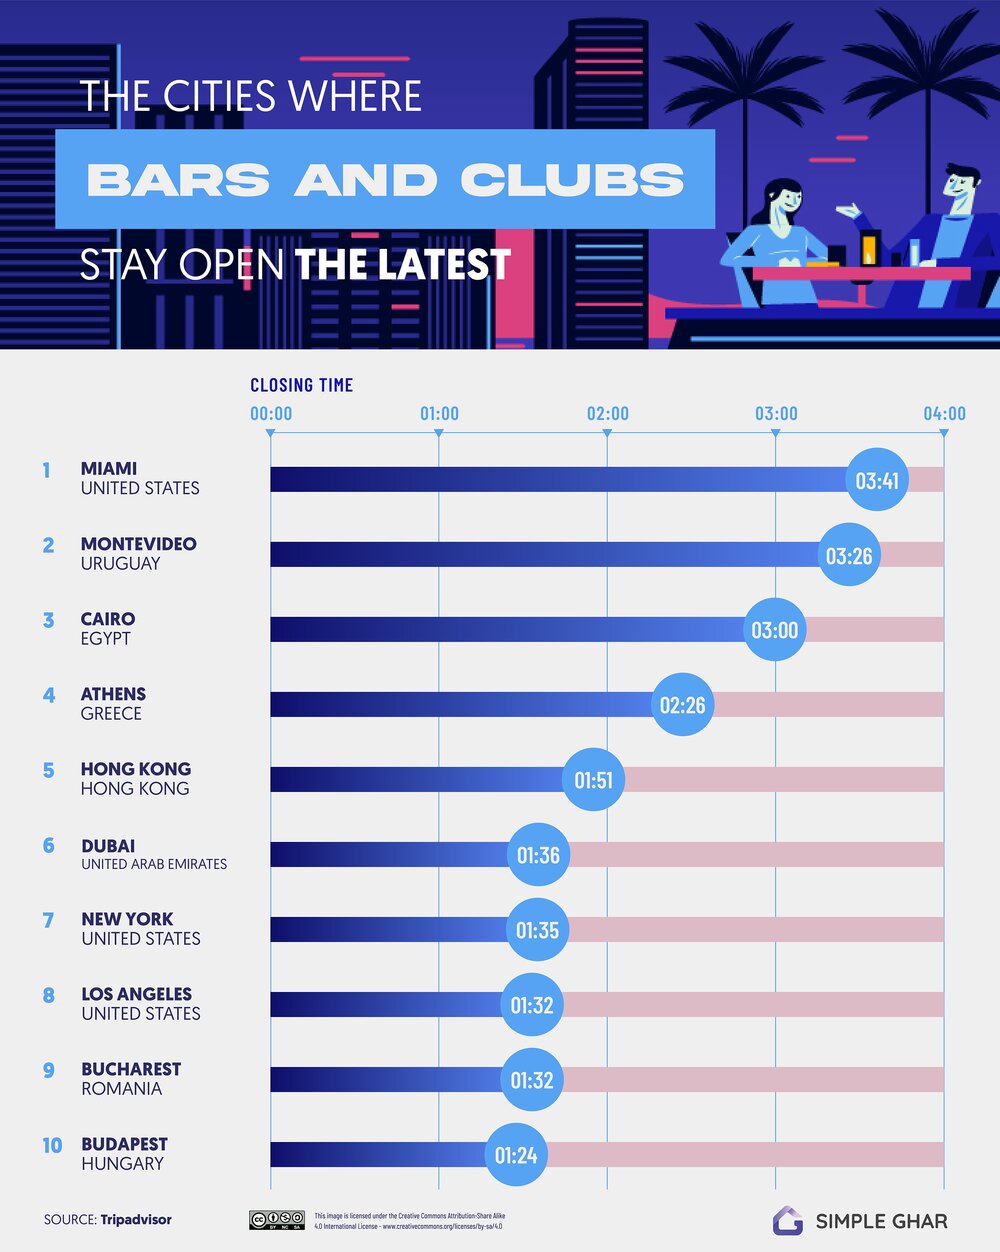 las_ciudades_donde_bares_y_clubs_stay_open_the_latest